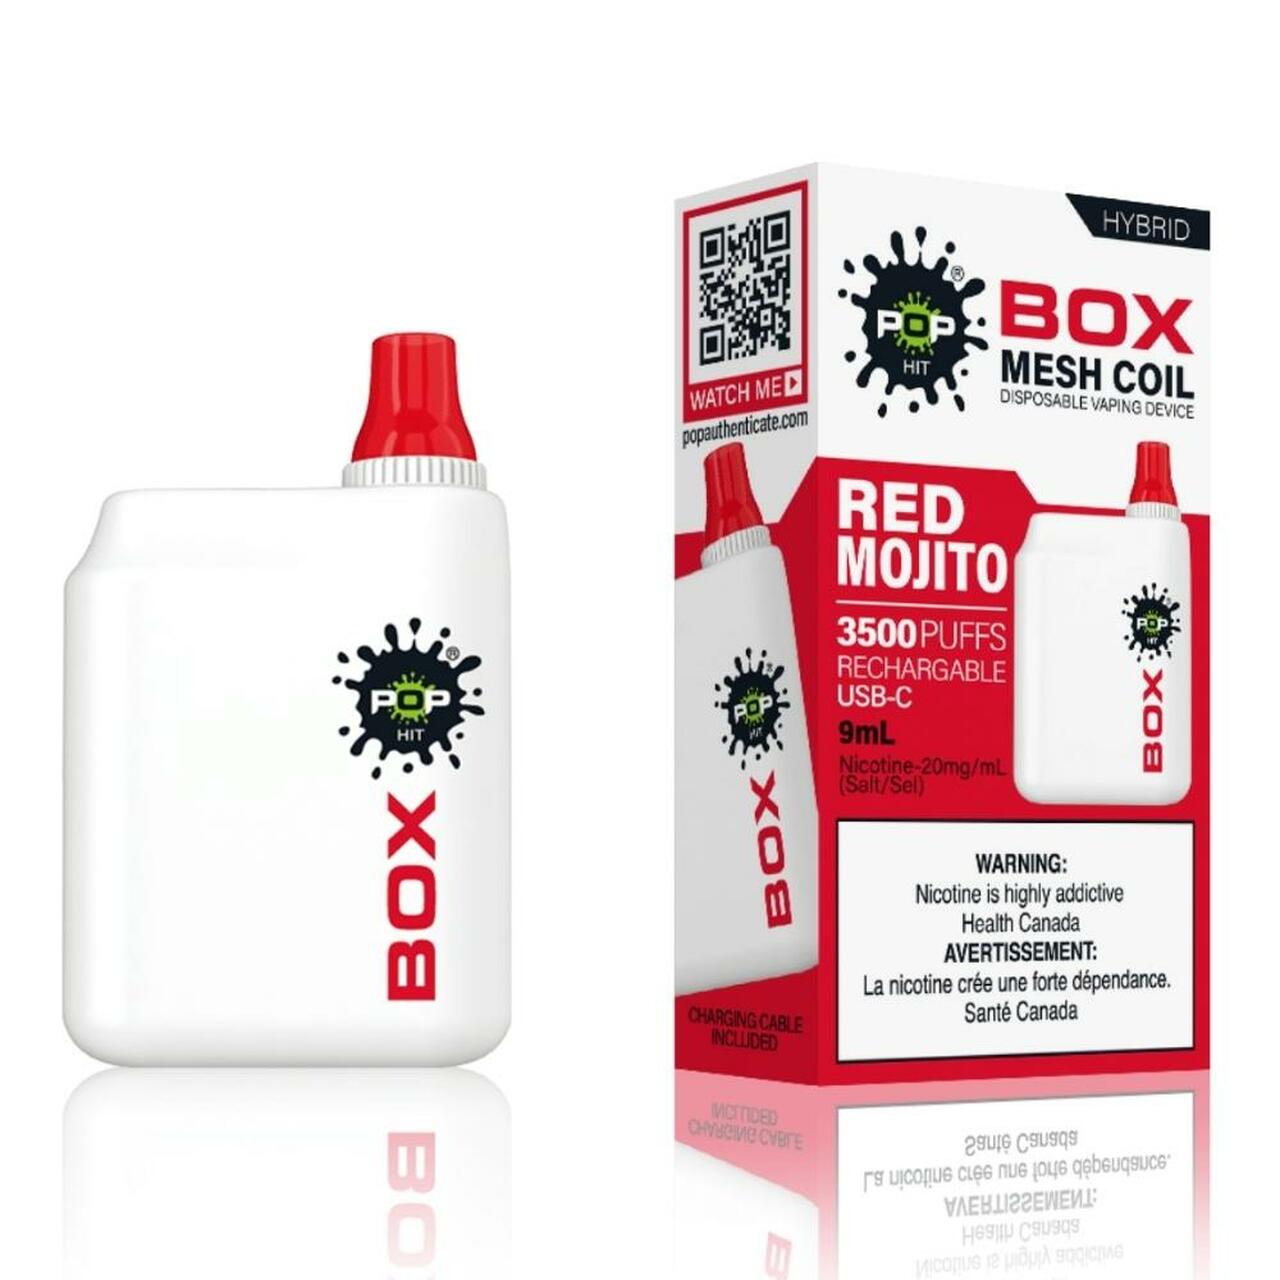 Red Mojito Pop Hybrid Box 3500 Puff Rechargeable Vape Device